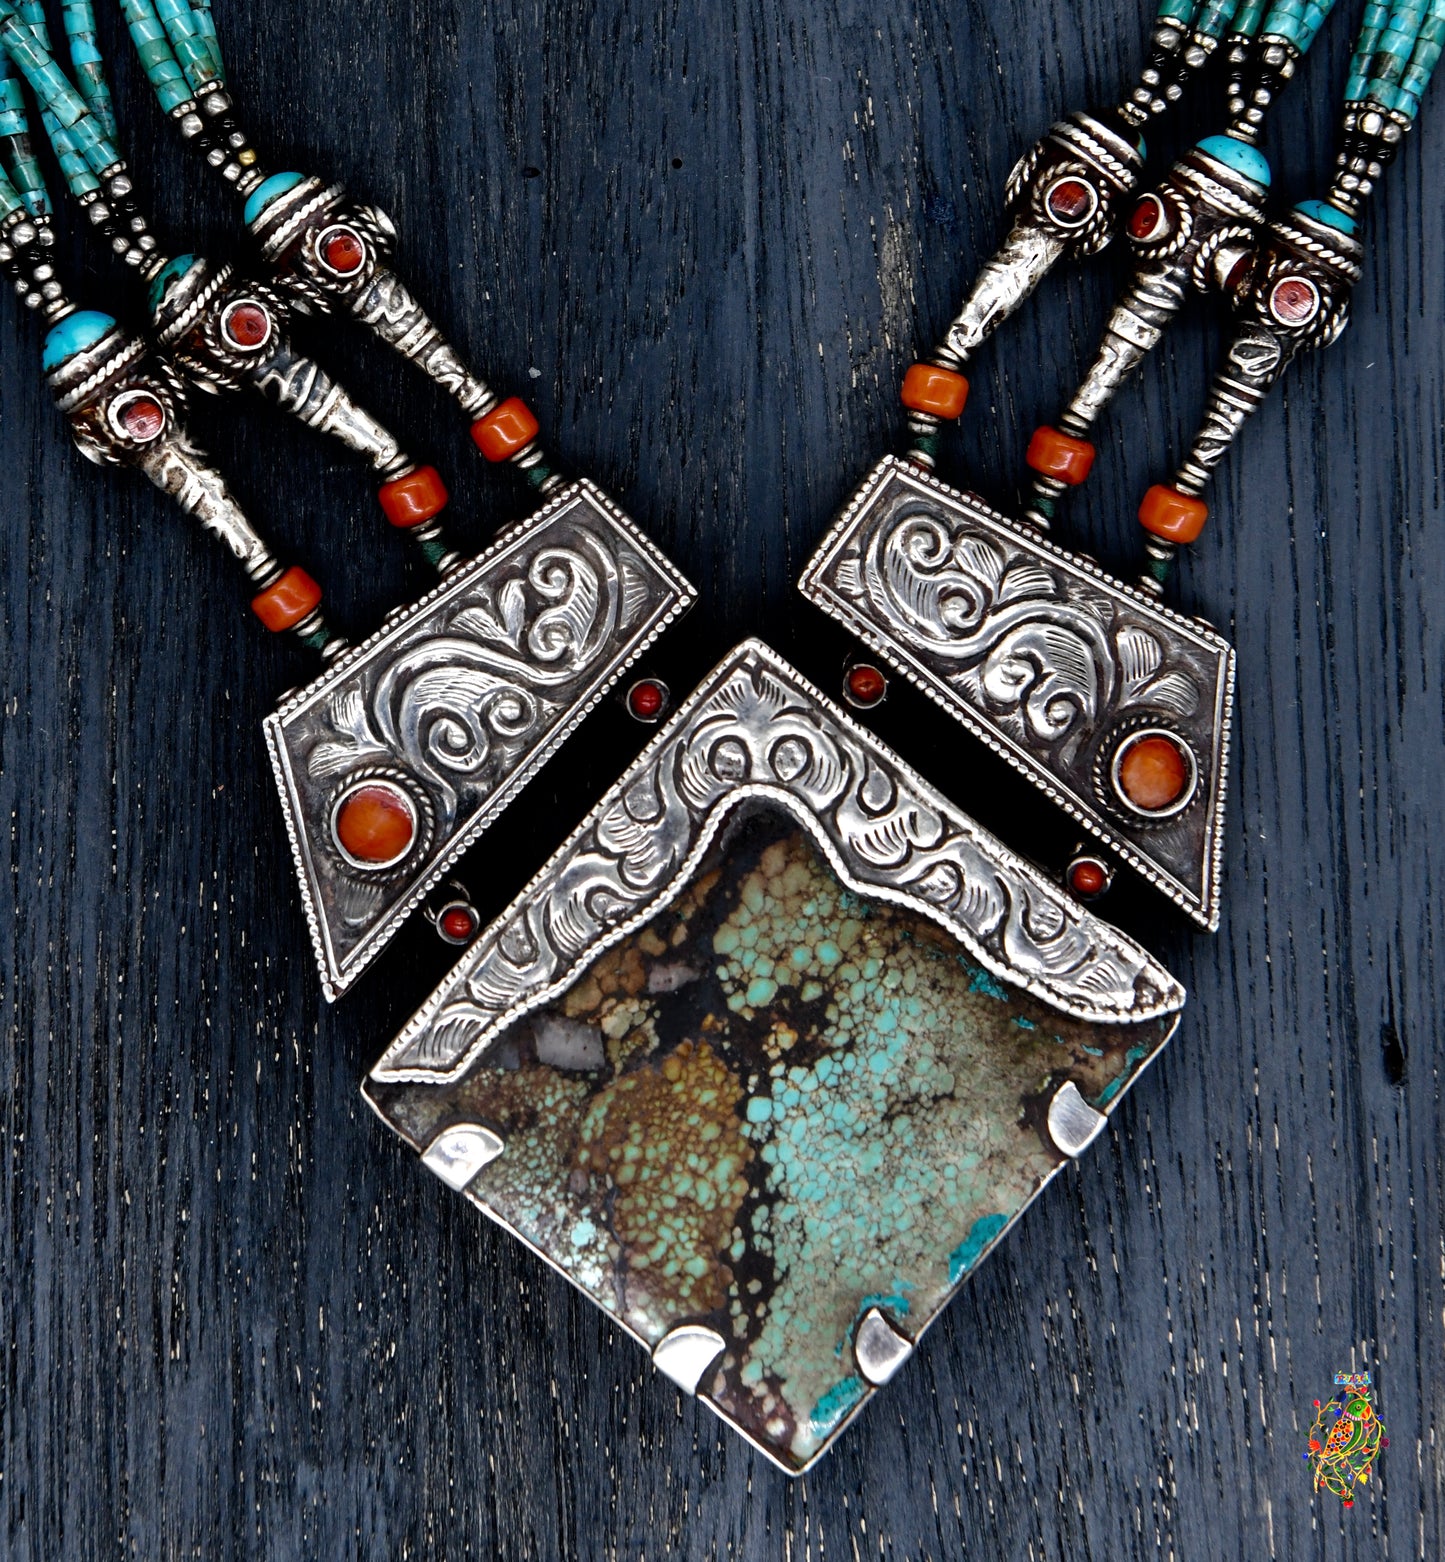 Antique Silver Necklace on Turquoise Pipes